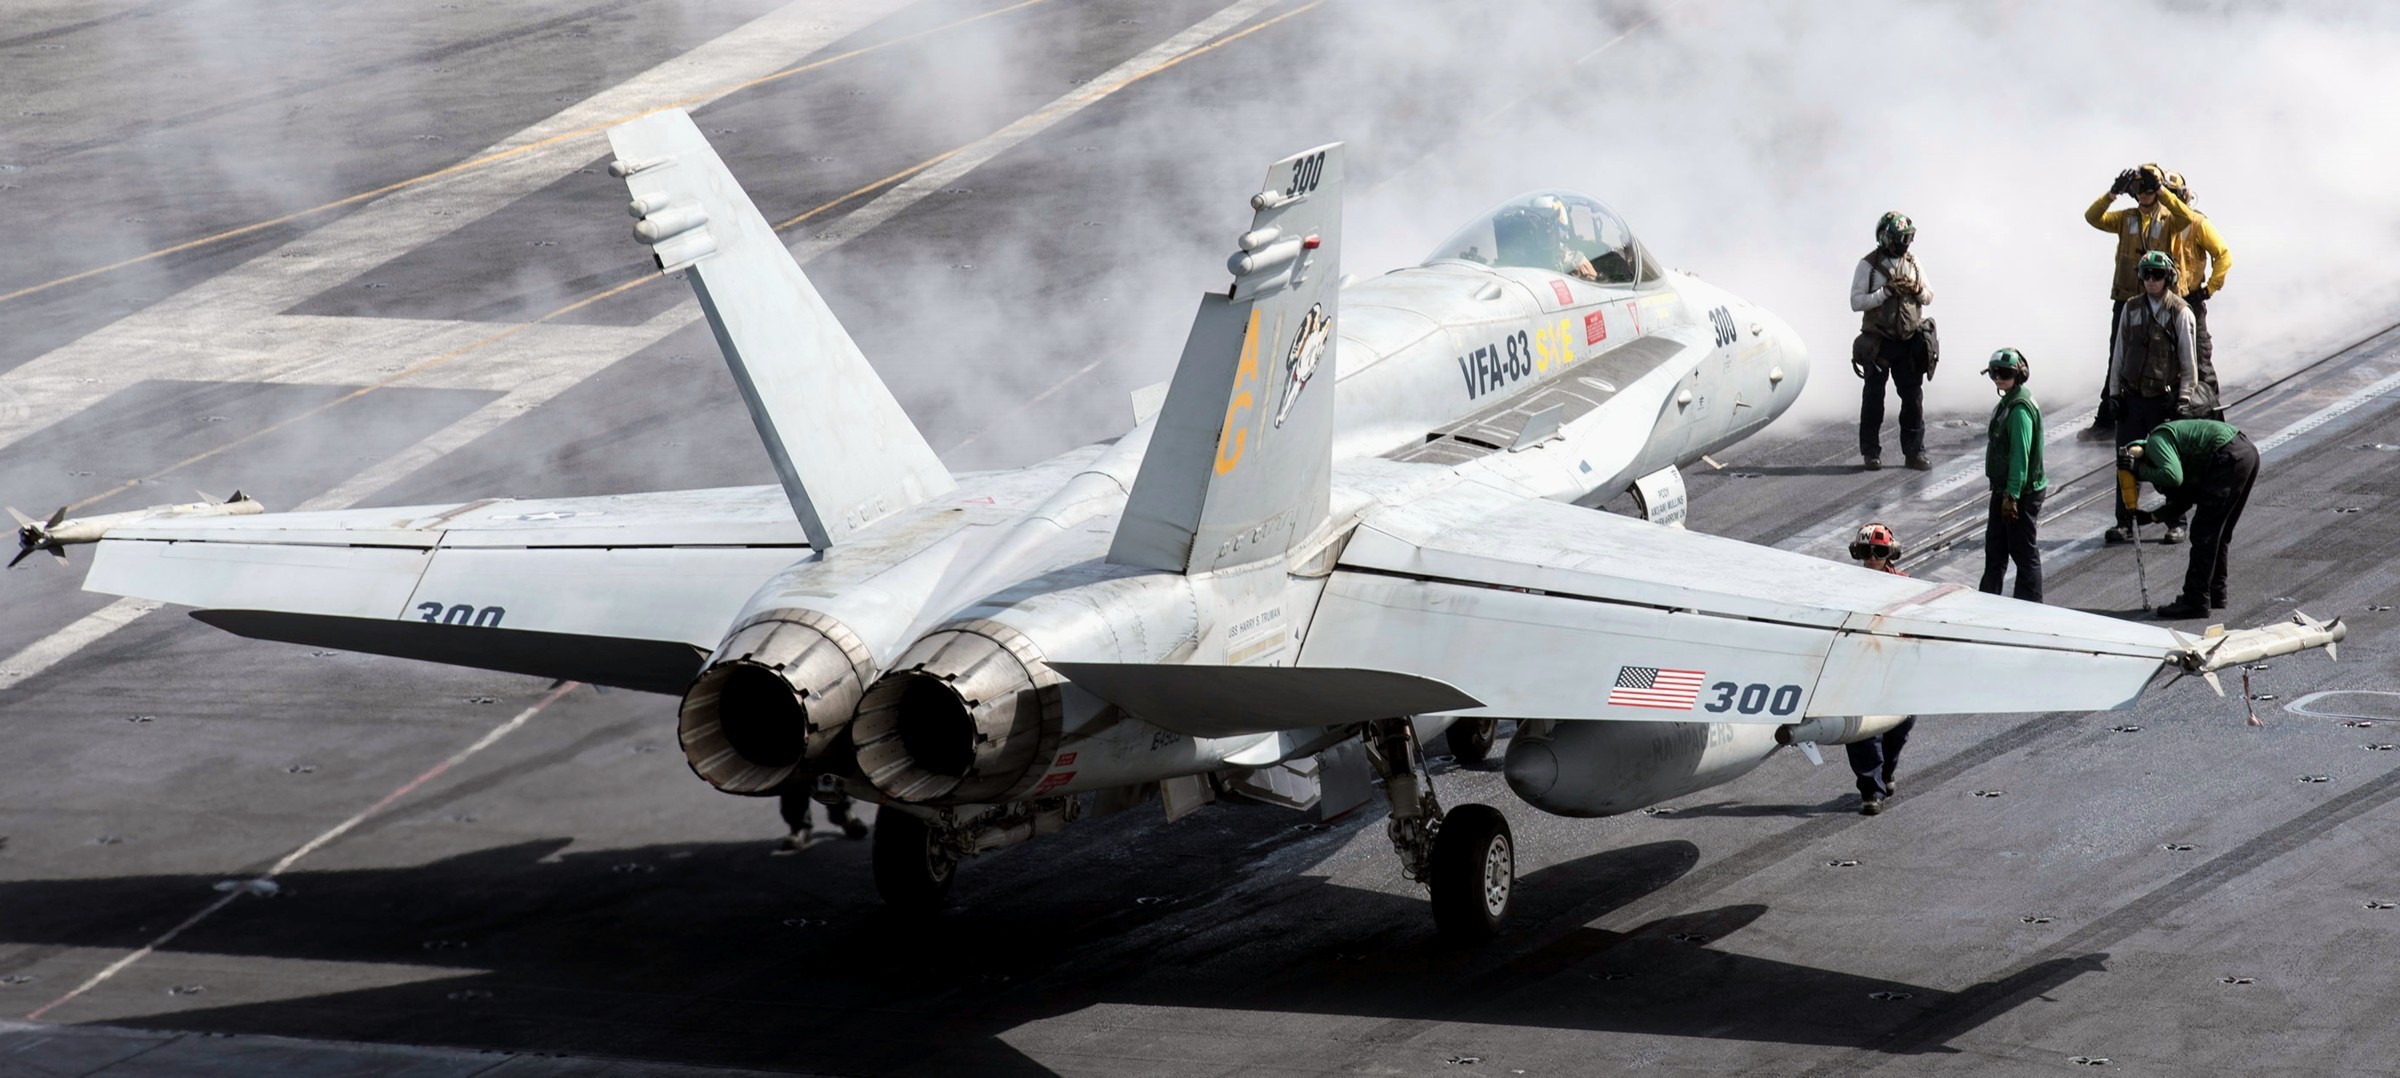 vfa-83 rampagers strike fighter squadron f/a-18c hornet cvw-7 uss harry s. truman cvn-75 46